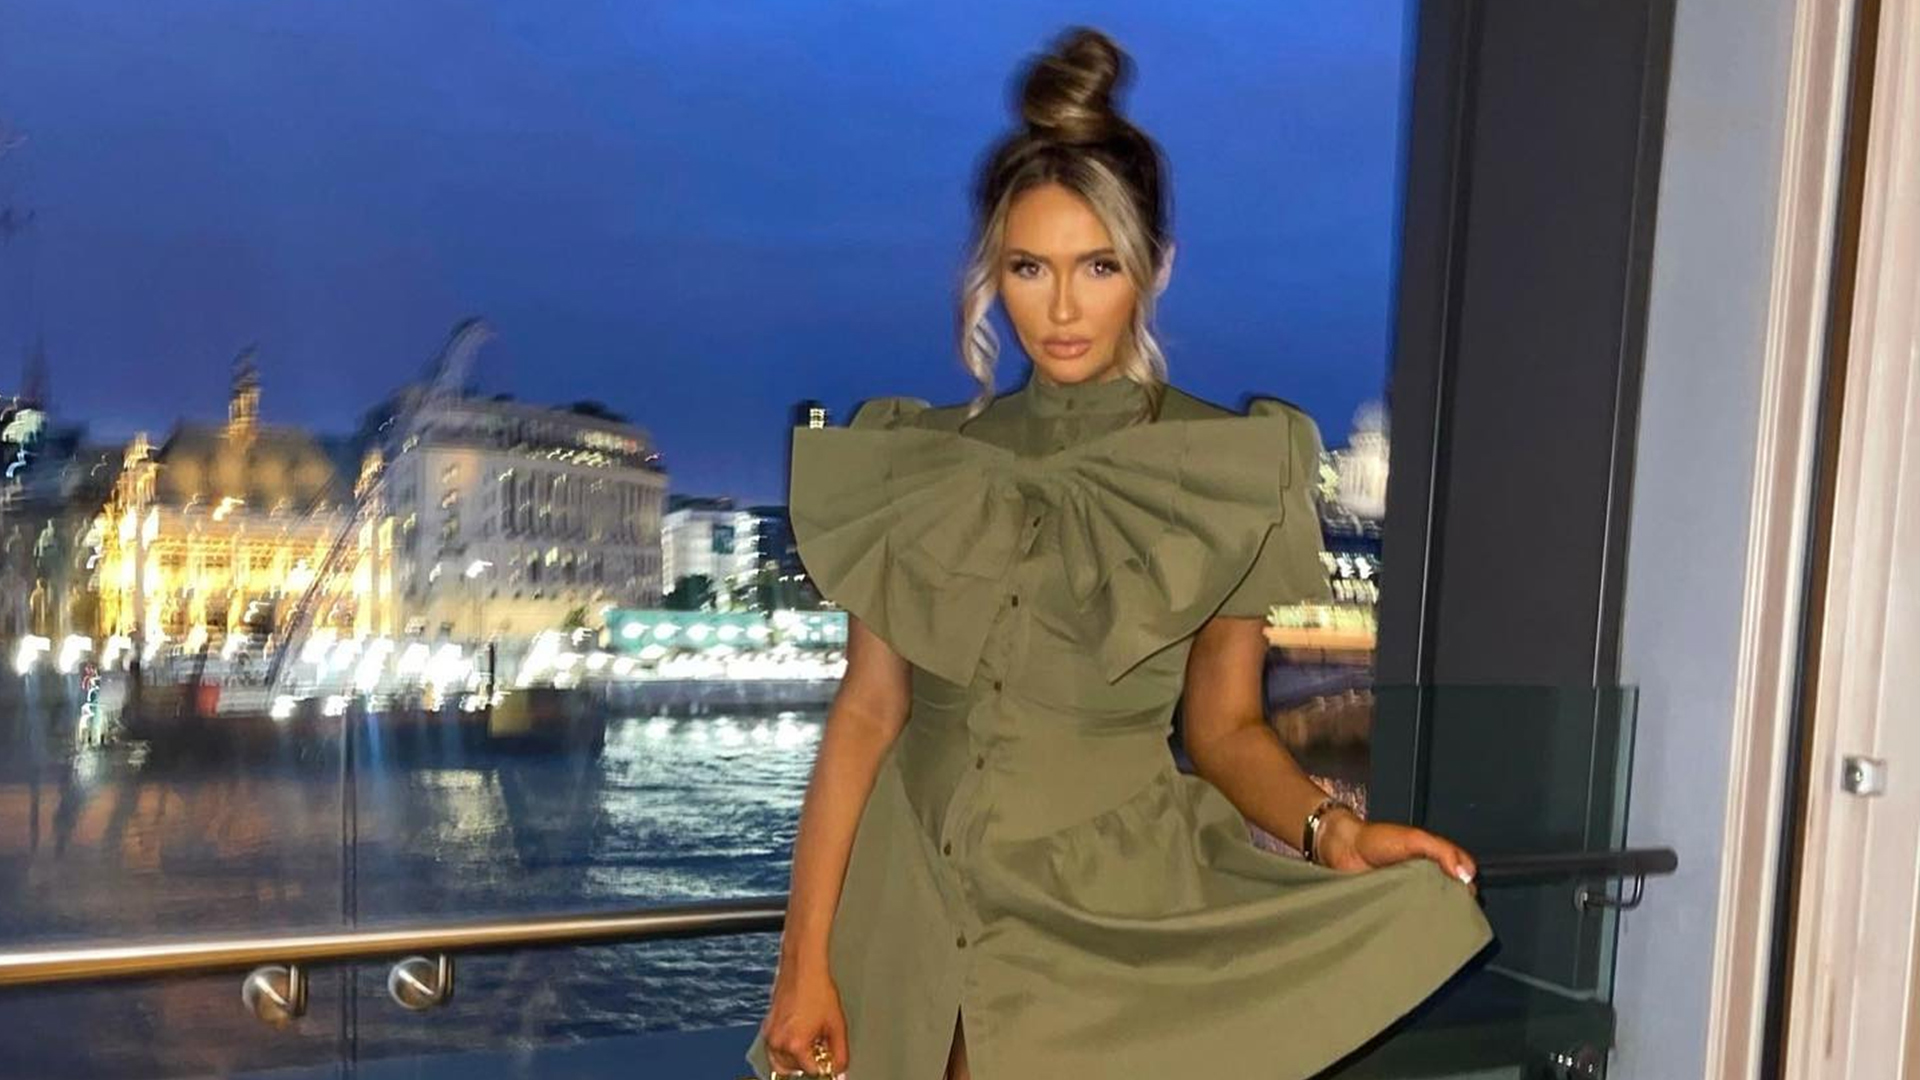 Charlotte Dawson puts on a brave face for night out in London after devastating miscarriage